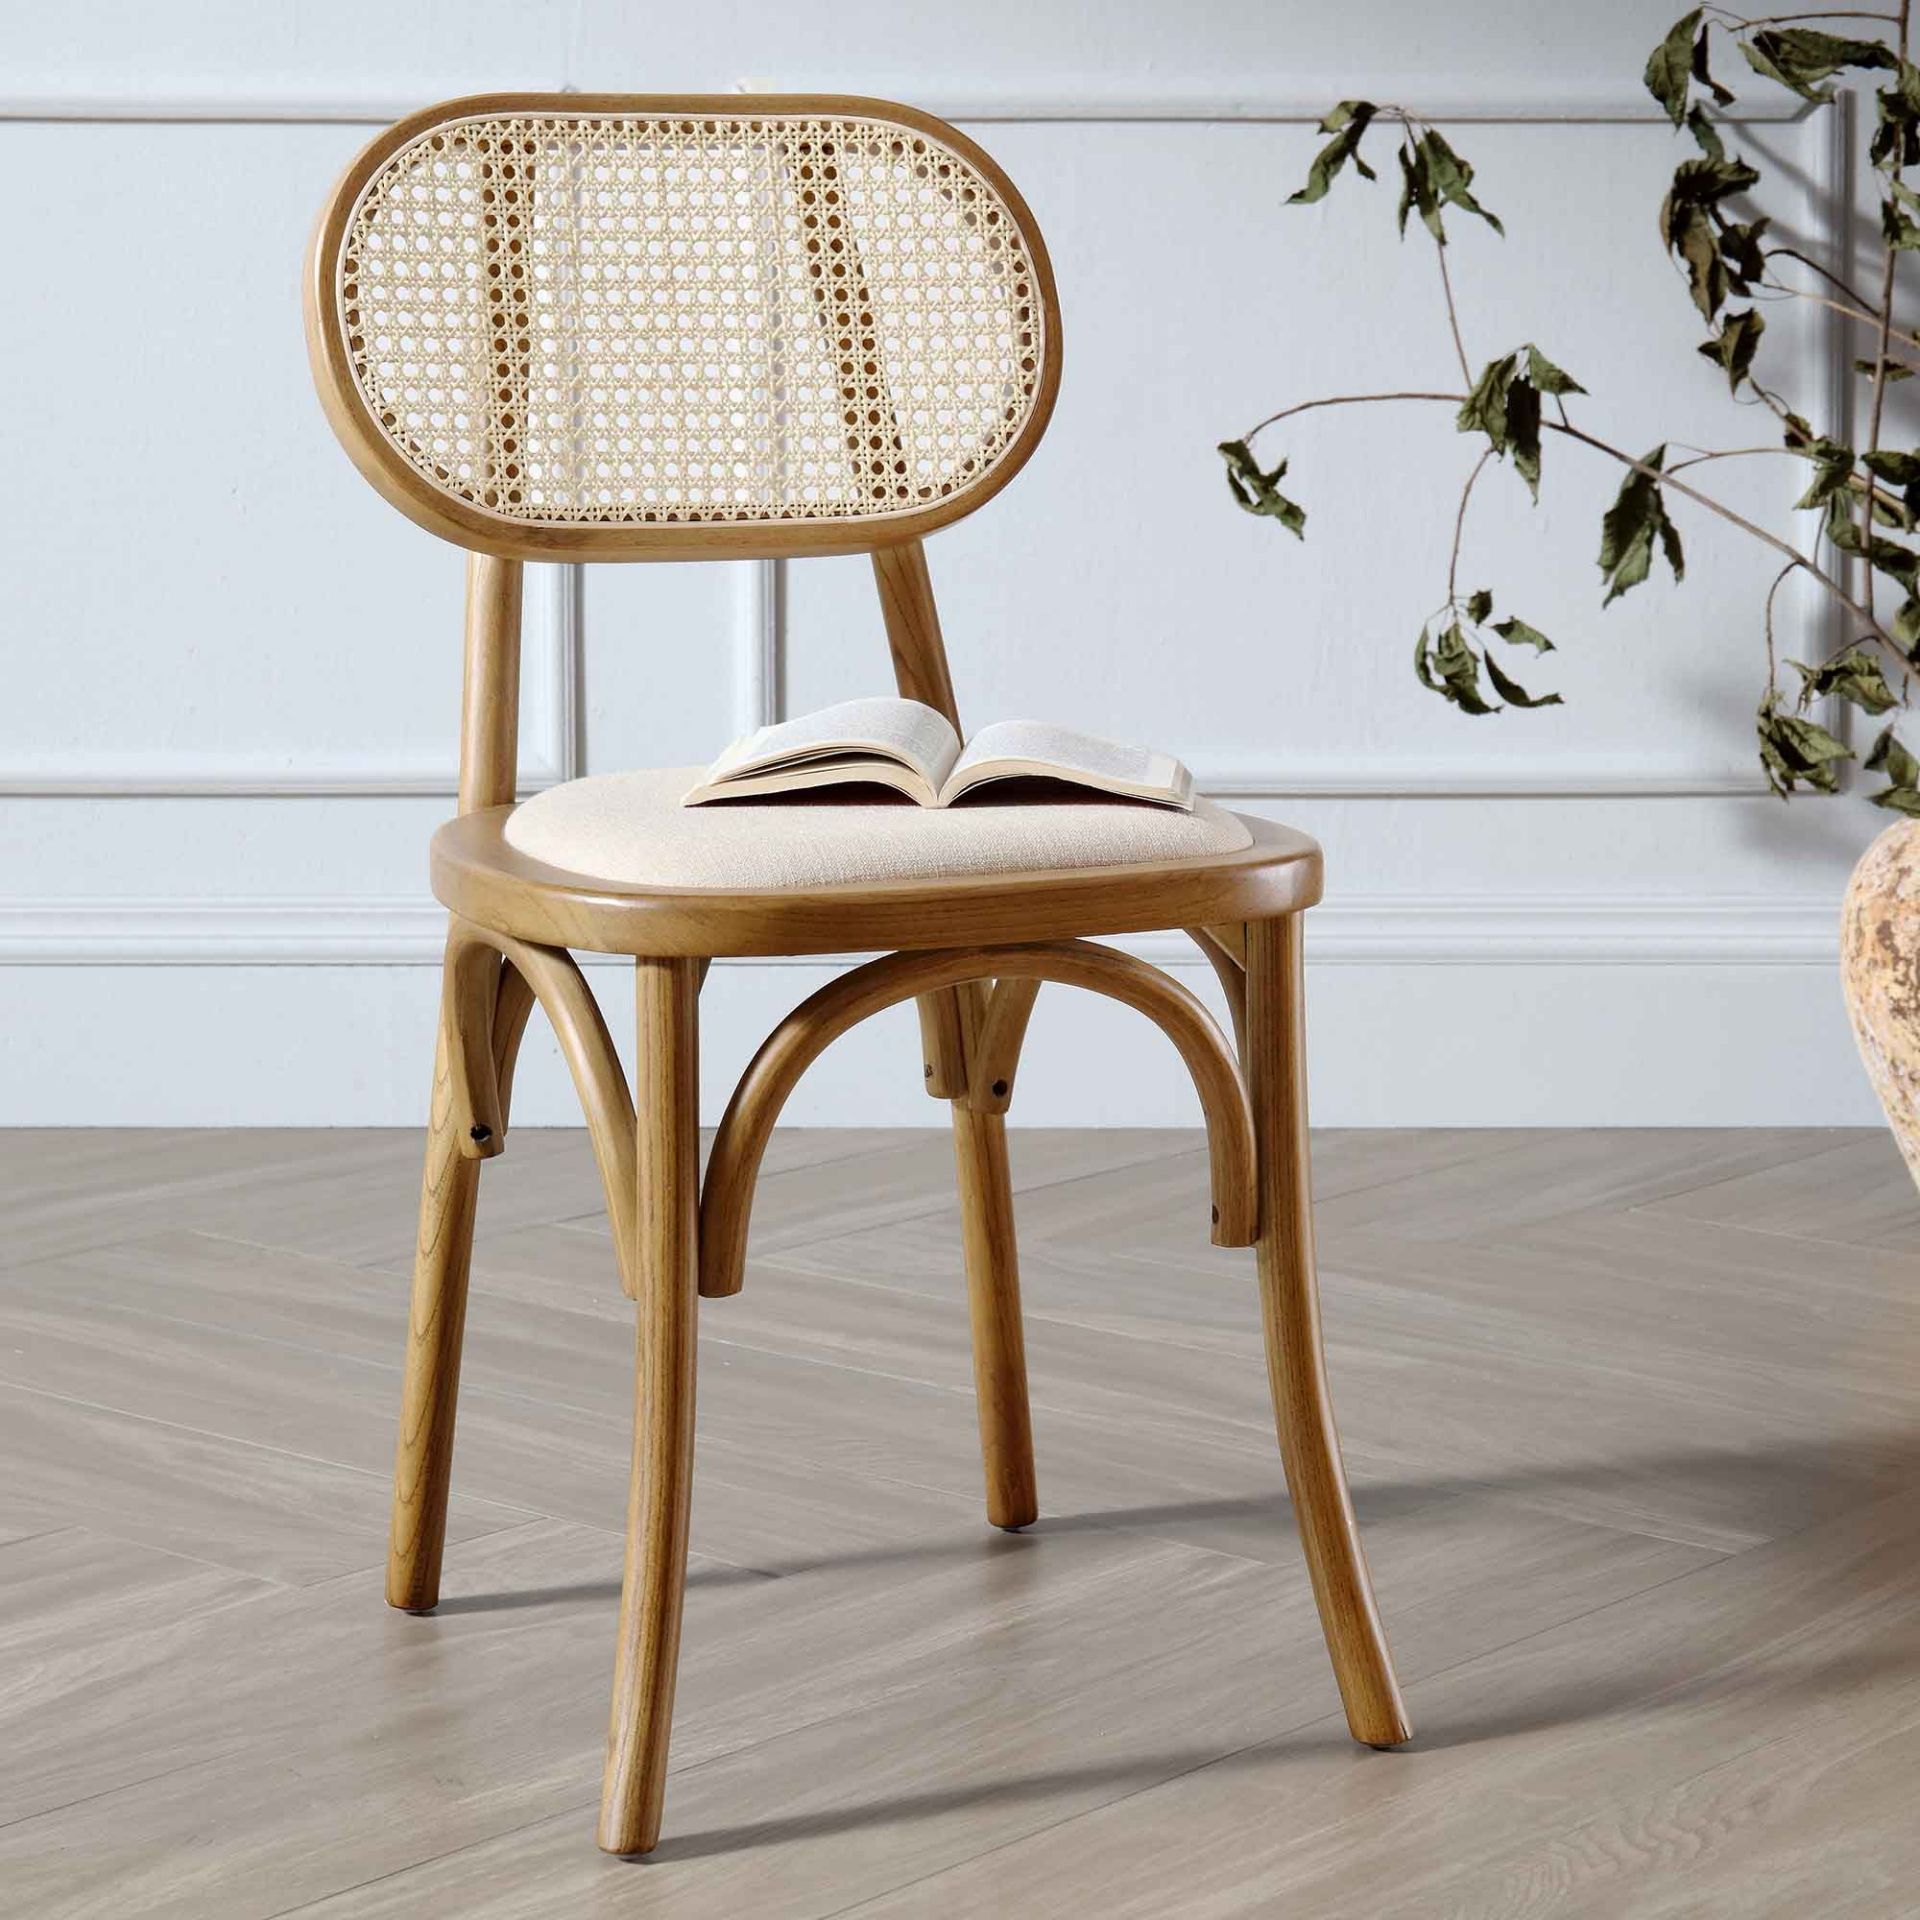 Anya Set of 2 Cane Rattan and Upholstered Dining Chairs, Light Walnut. -ER29. RRP £319.99.